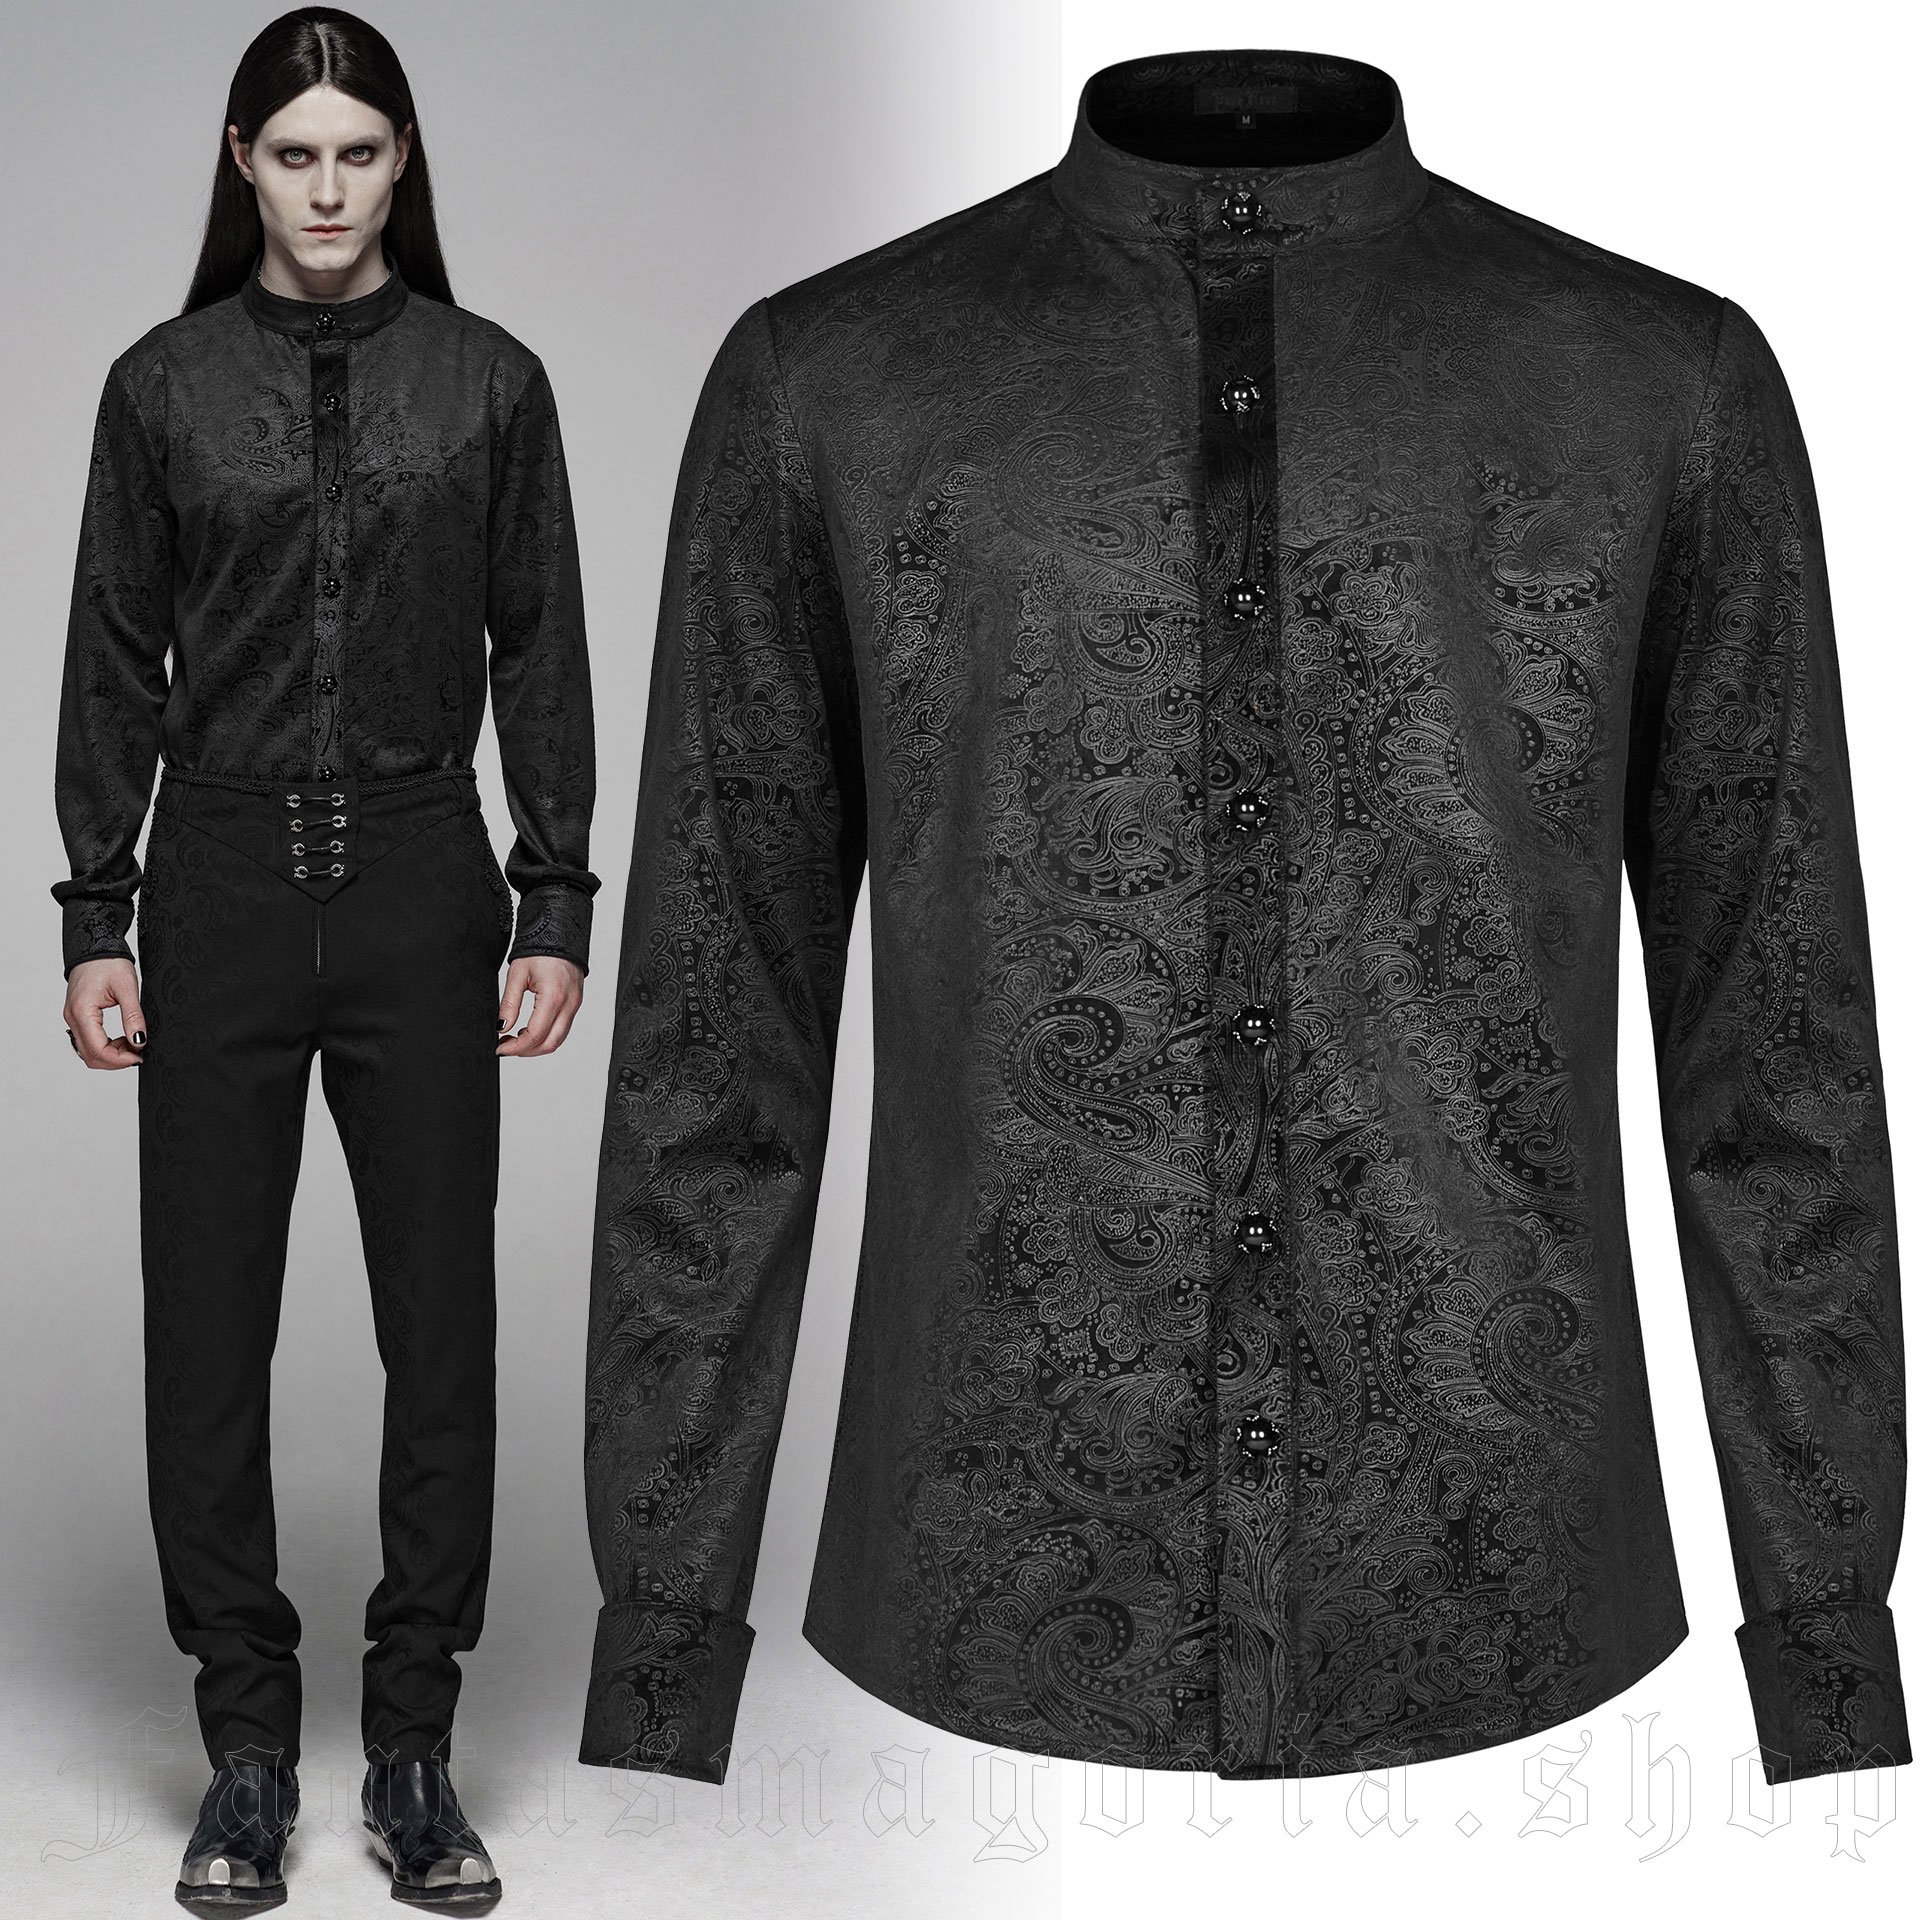 Long-sleeved shirt with band style collar by Punk Rave.. Punk